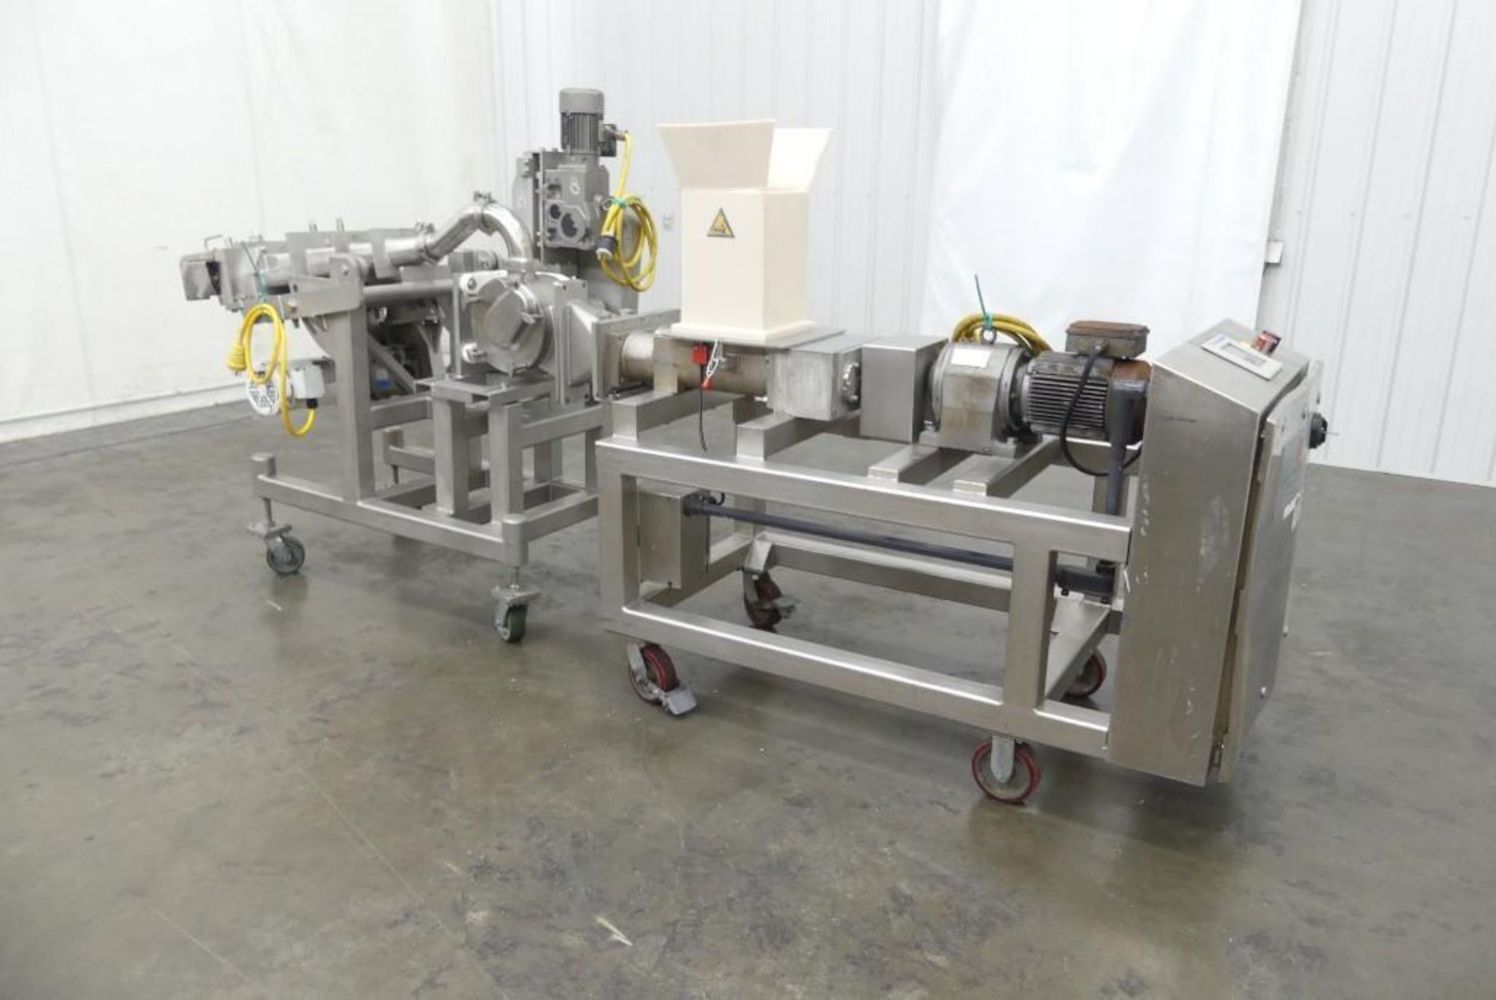 Bakery and Snack Food Equipment Auction: Conveyors, Metal Detectors, Checkweighers, Pretzel Extruders, Linear Bucket Scales, CCWs, and More